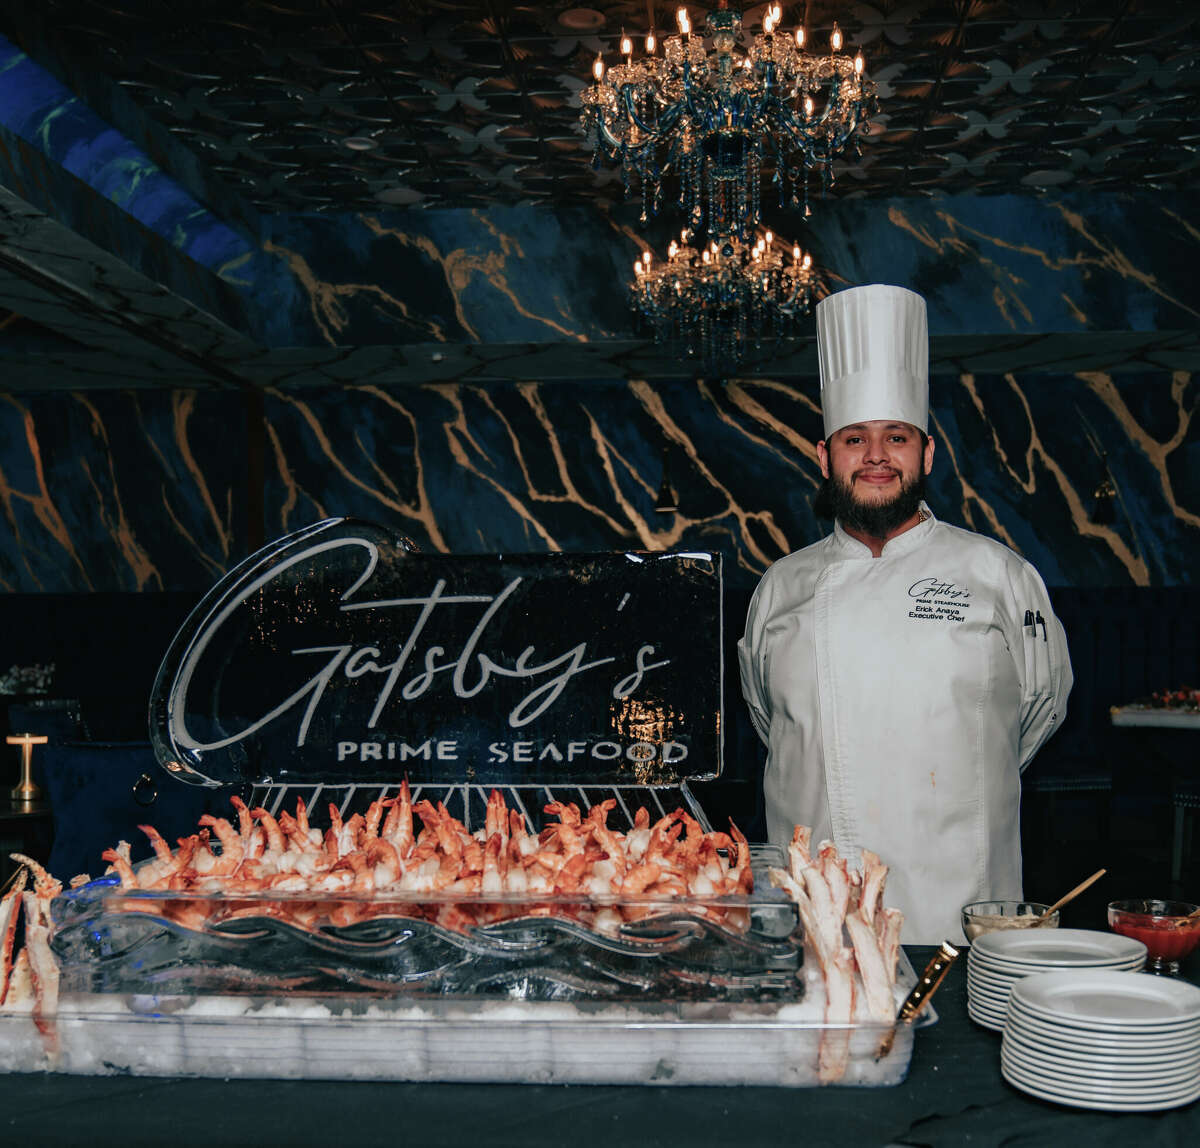 Erick Anaya is exectutive chef at Gatsby’s Prime Steakhouse.